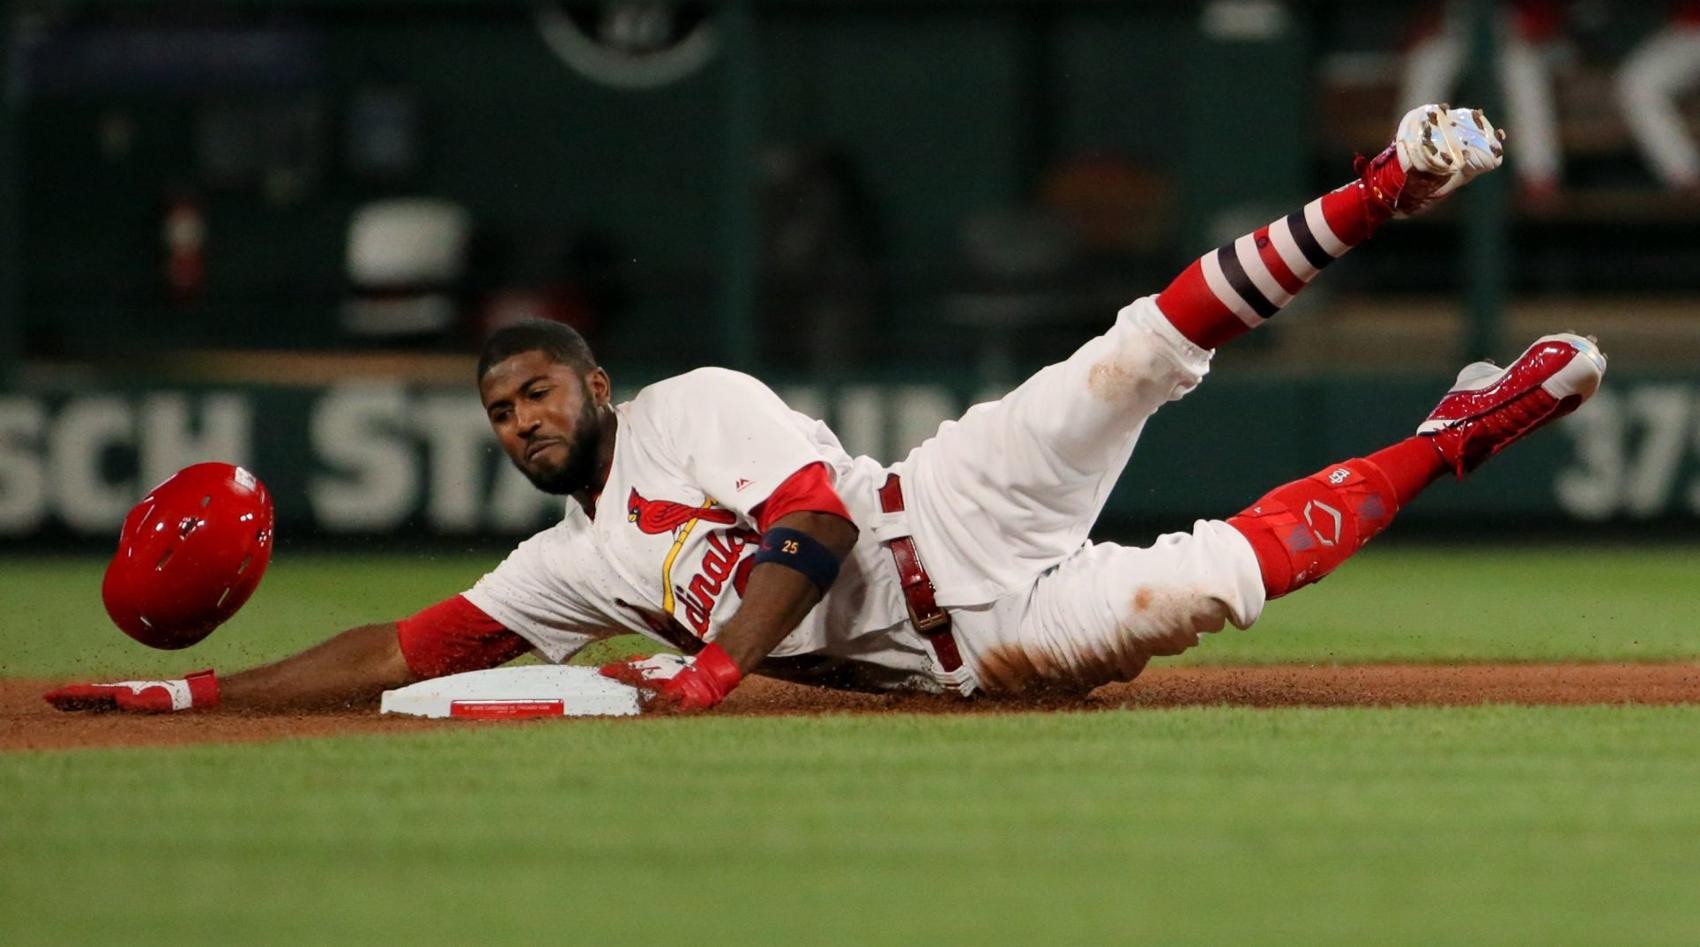 Hochman: Cards lead MLB in September steals. Can this supplement their lack of total hits?